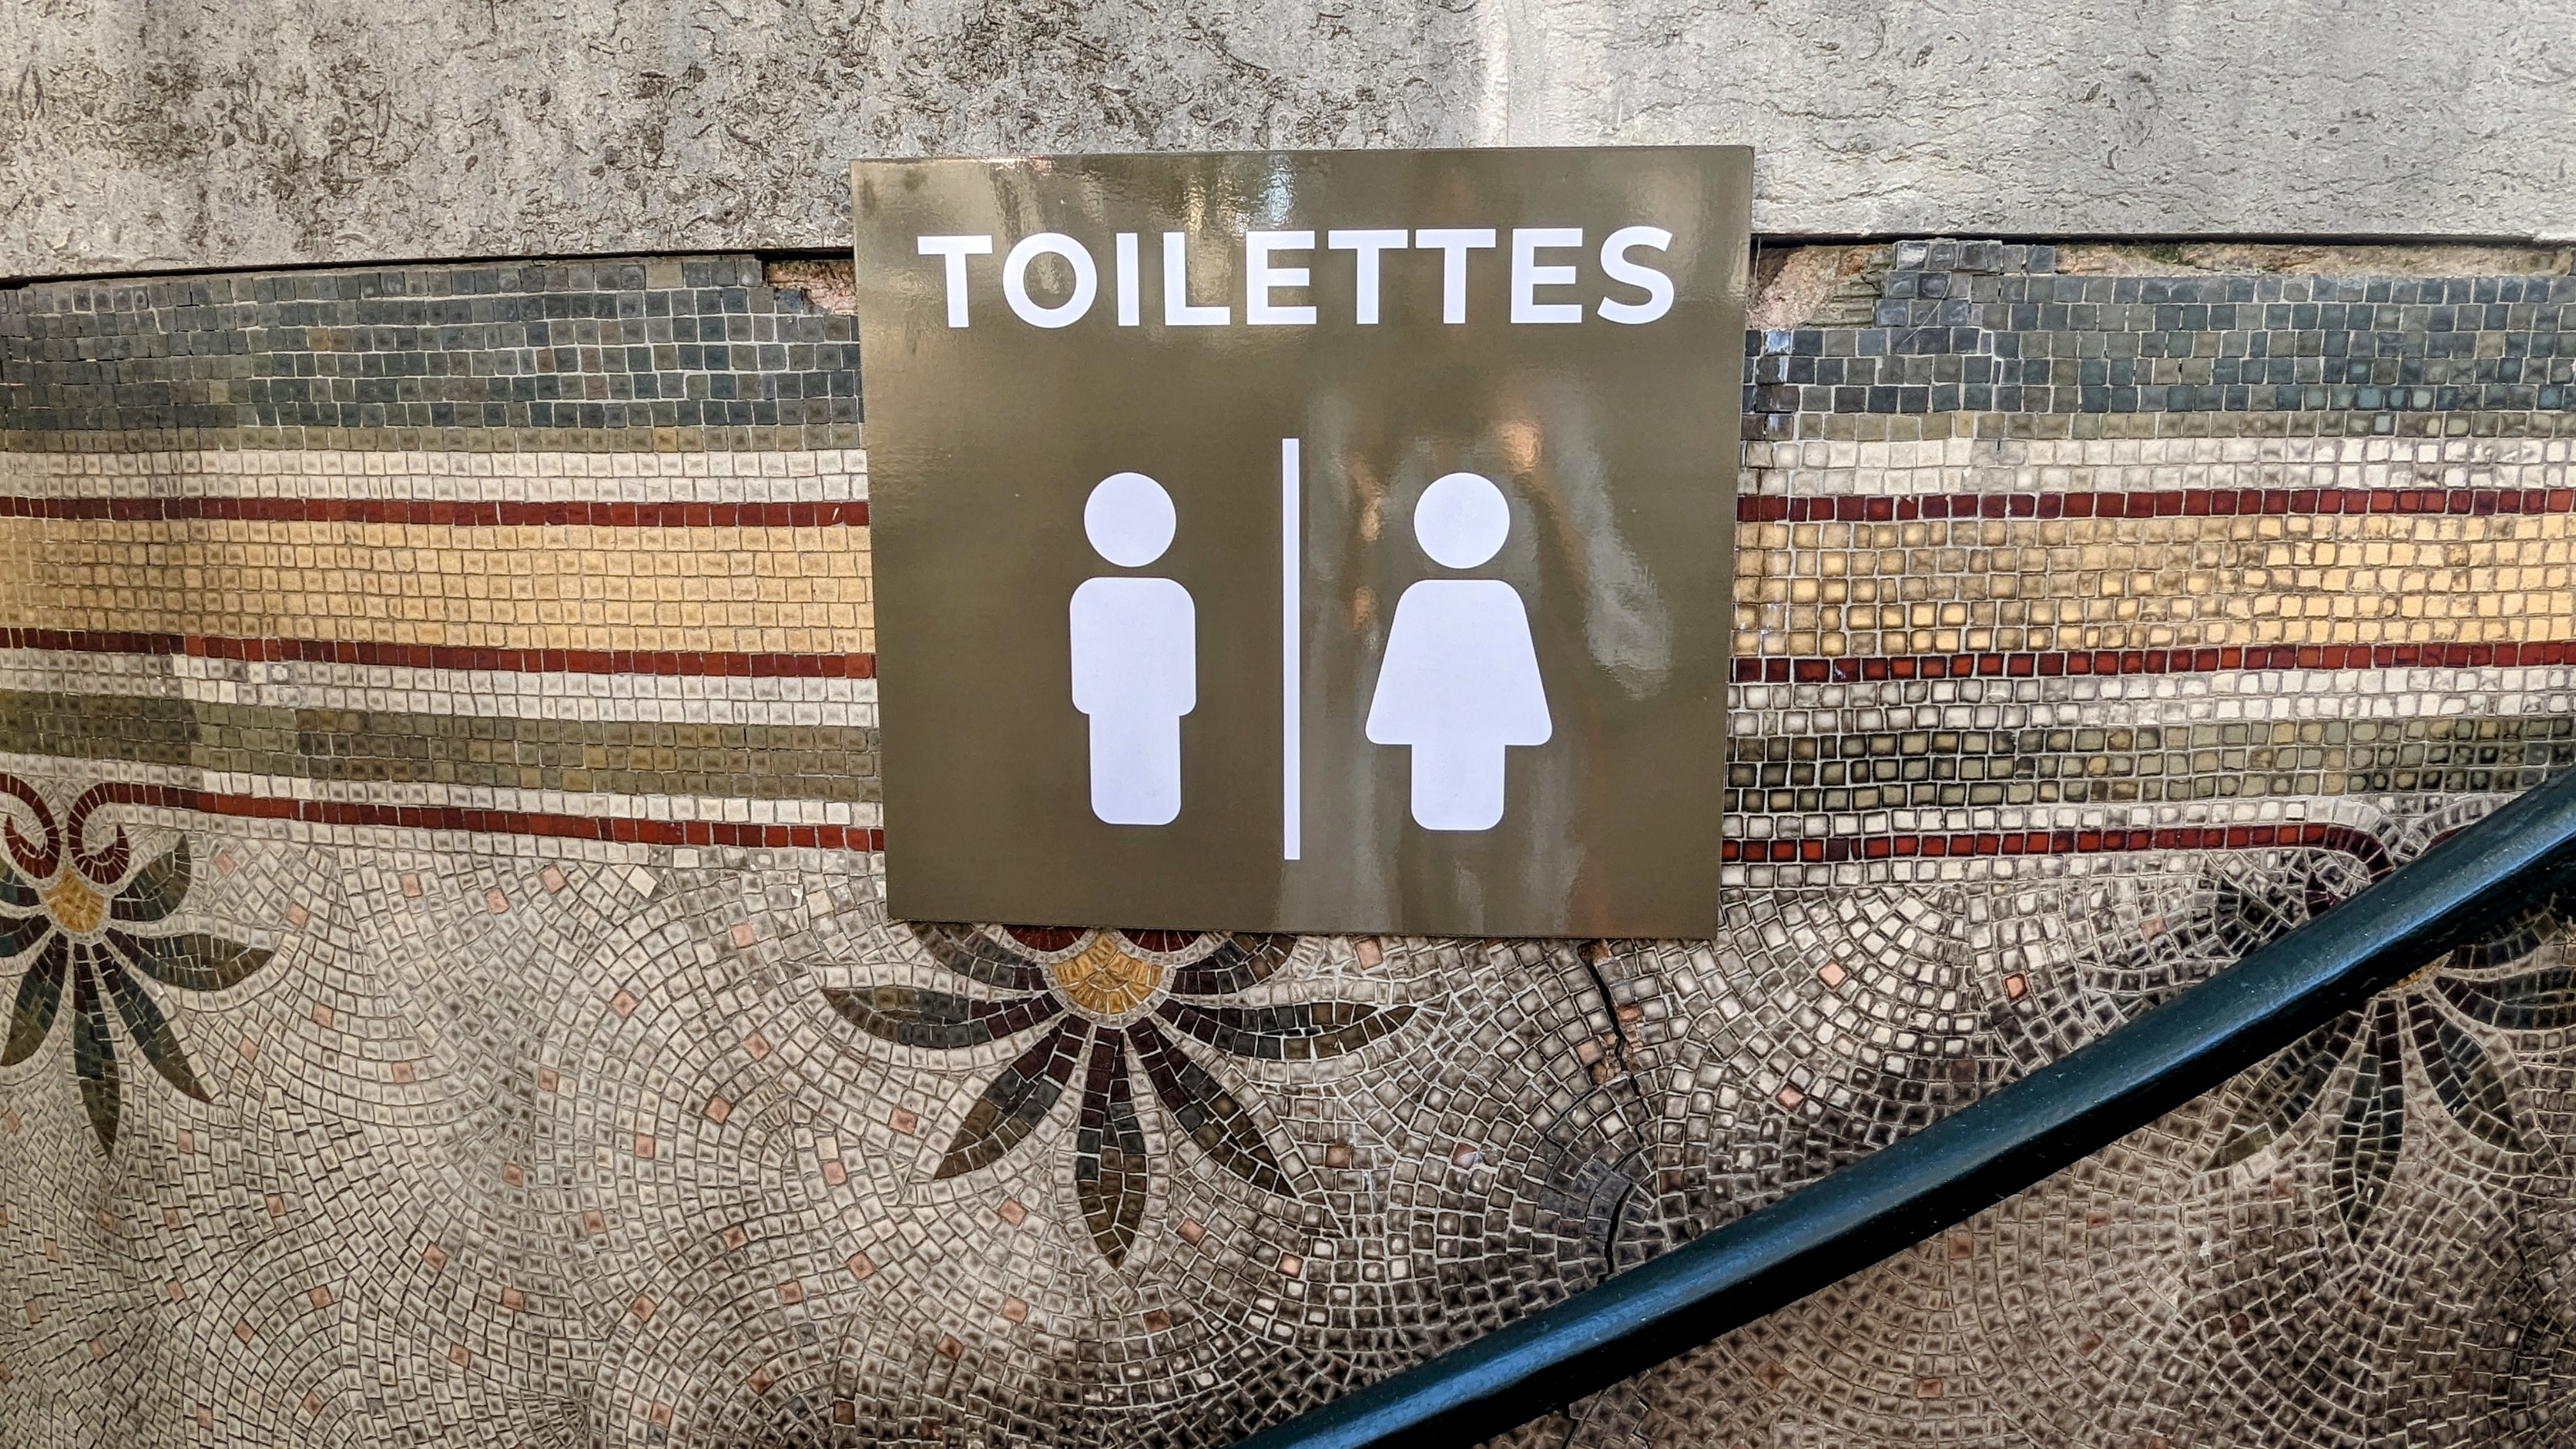 The sign indicating the Art Nouveau public restrooms Le Lavatory at Madeleine.